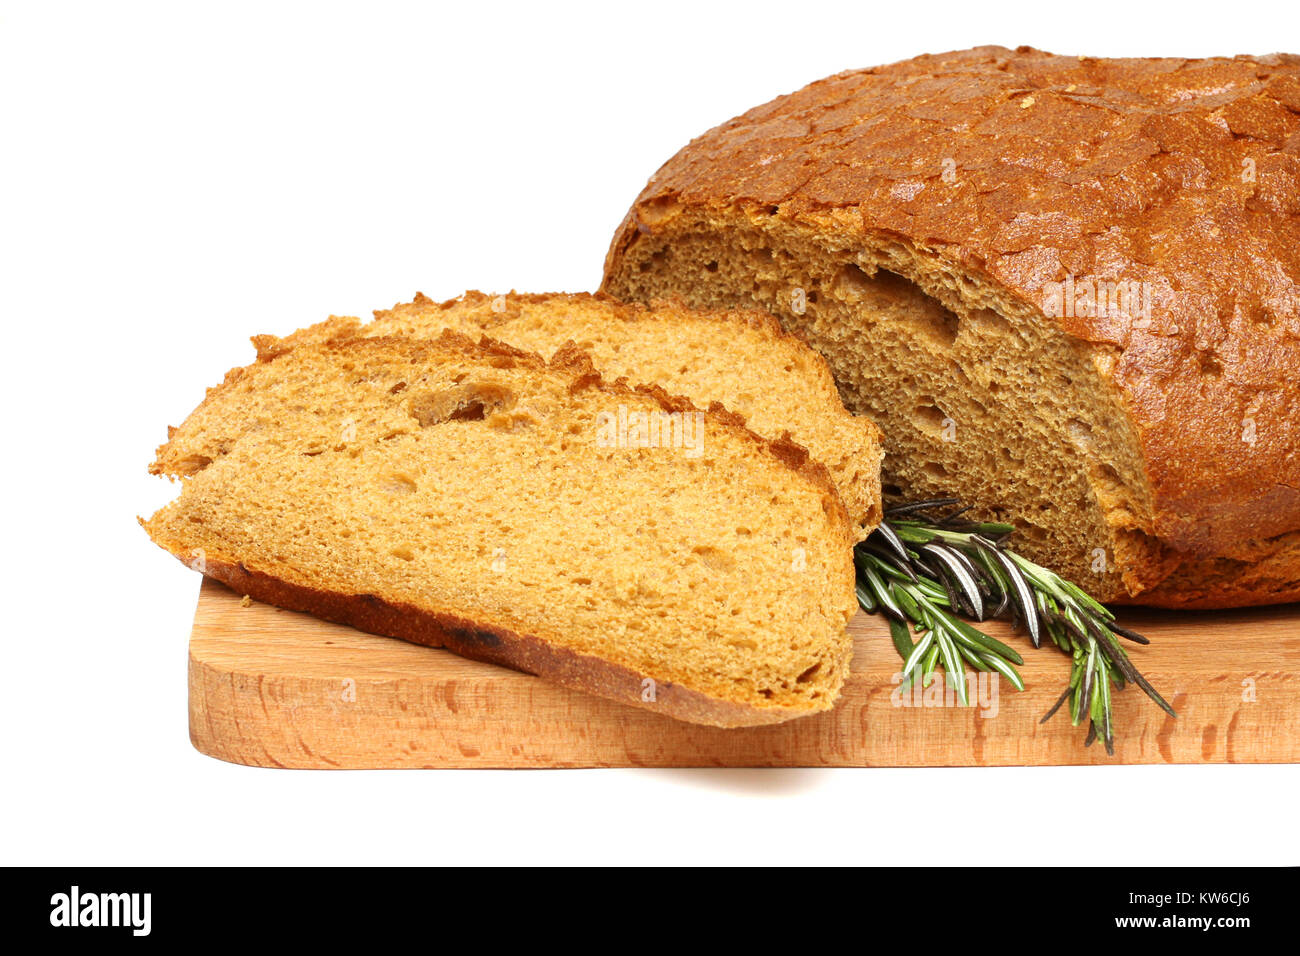 cut bread, herb and wooden board isolated on a white backgroud Stock Photo